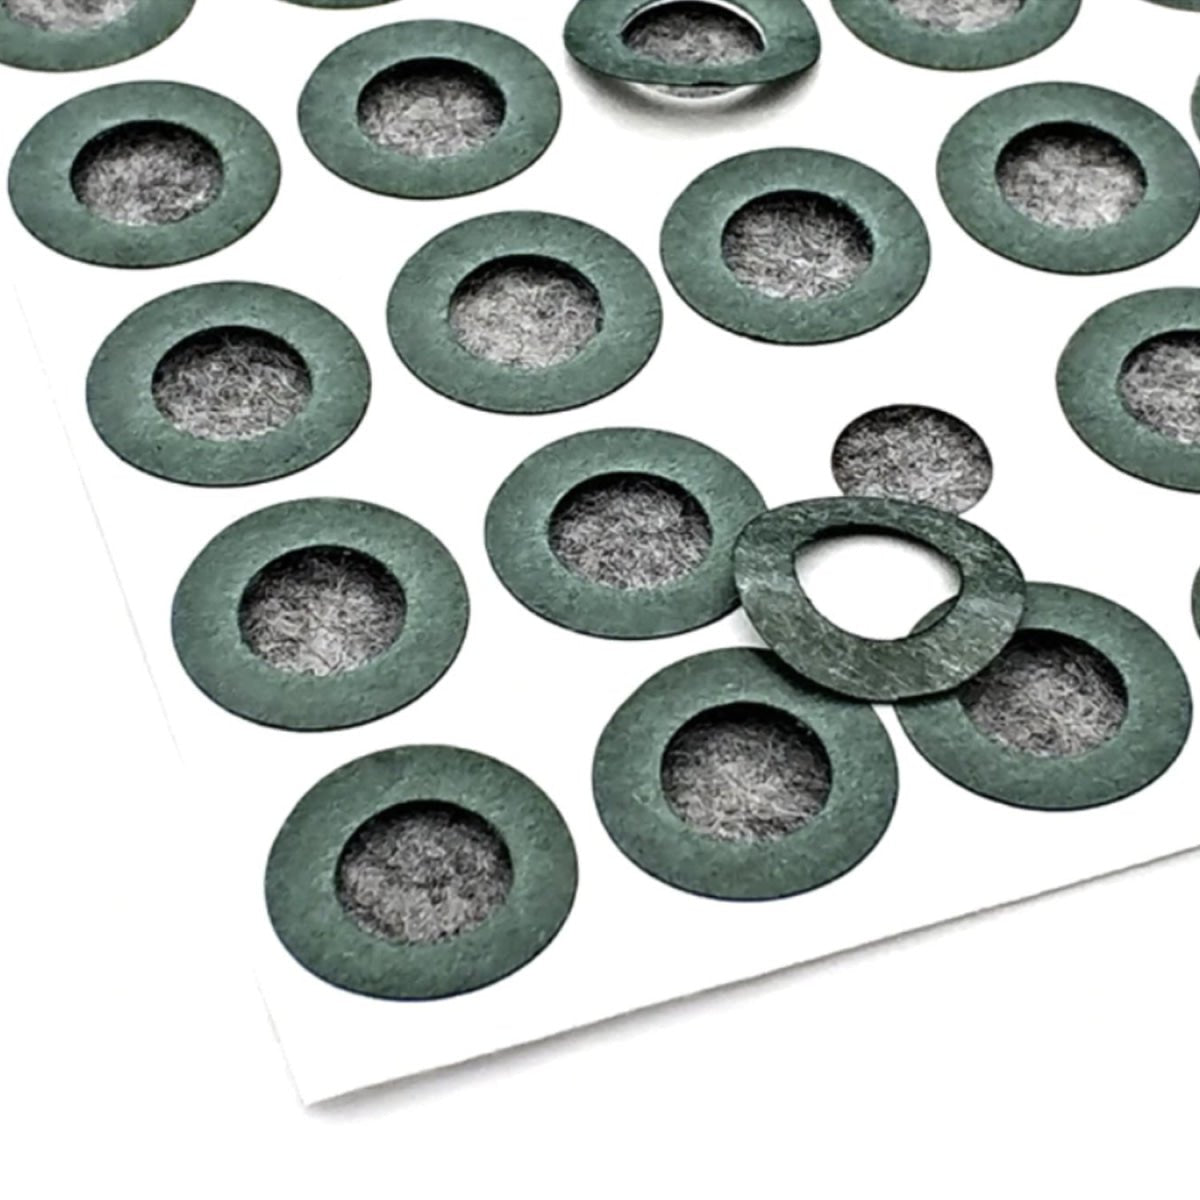 10mtr / 1000pcs 1S 18650 Barley Paper Li-ion Battery Insulation Gasket for Battery Pack Pad - 1080 centre-removed circles - - Asia Sell